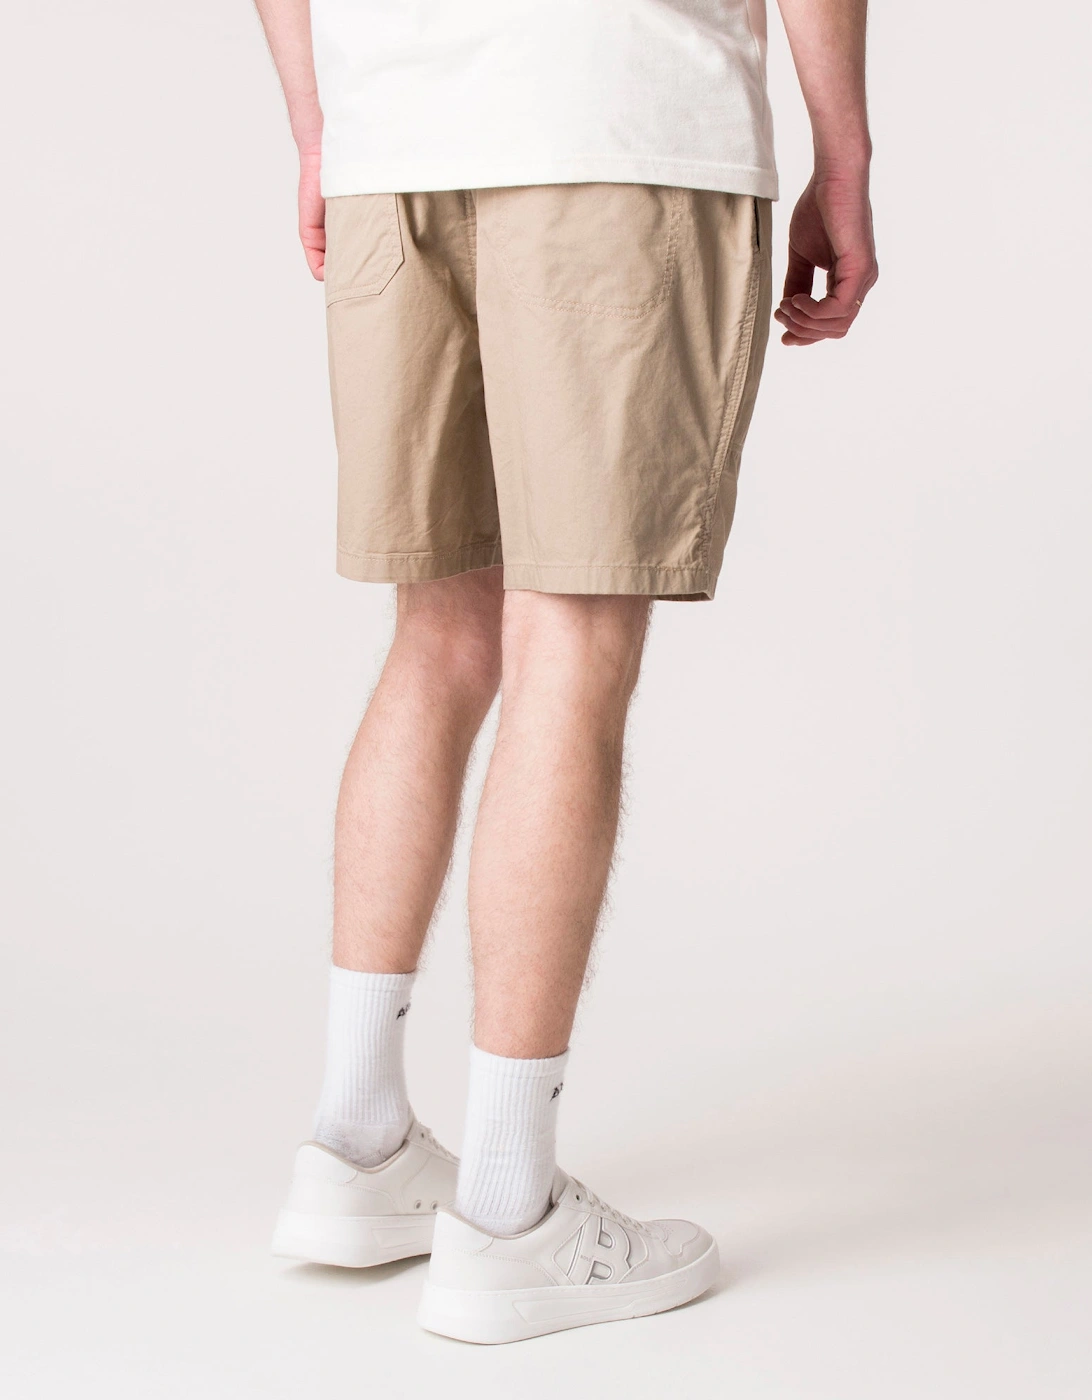 Relaxed Fit Pelican Rapids Shorts